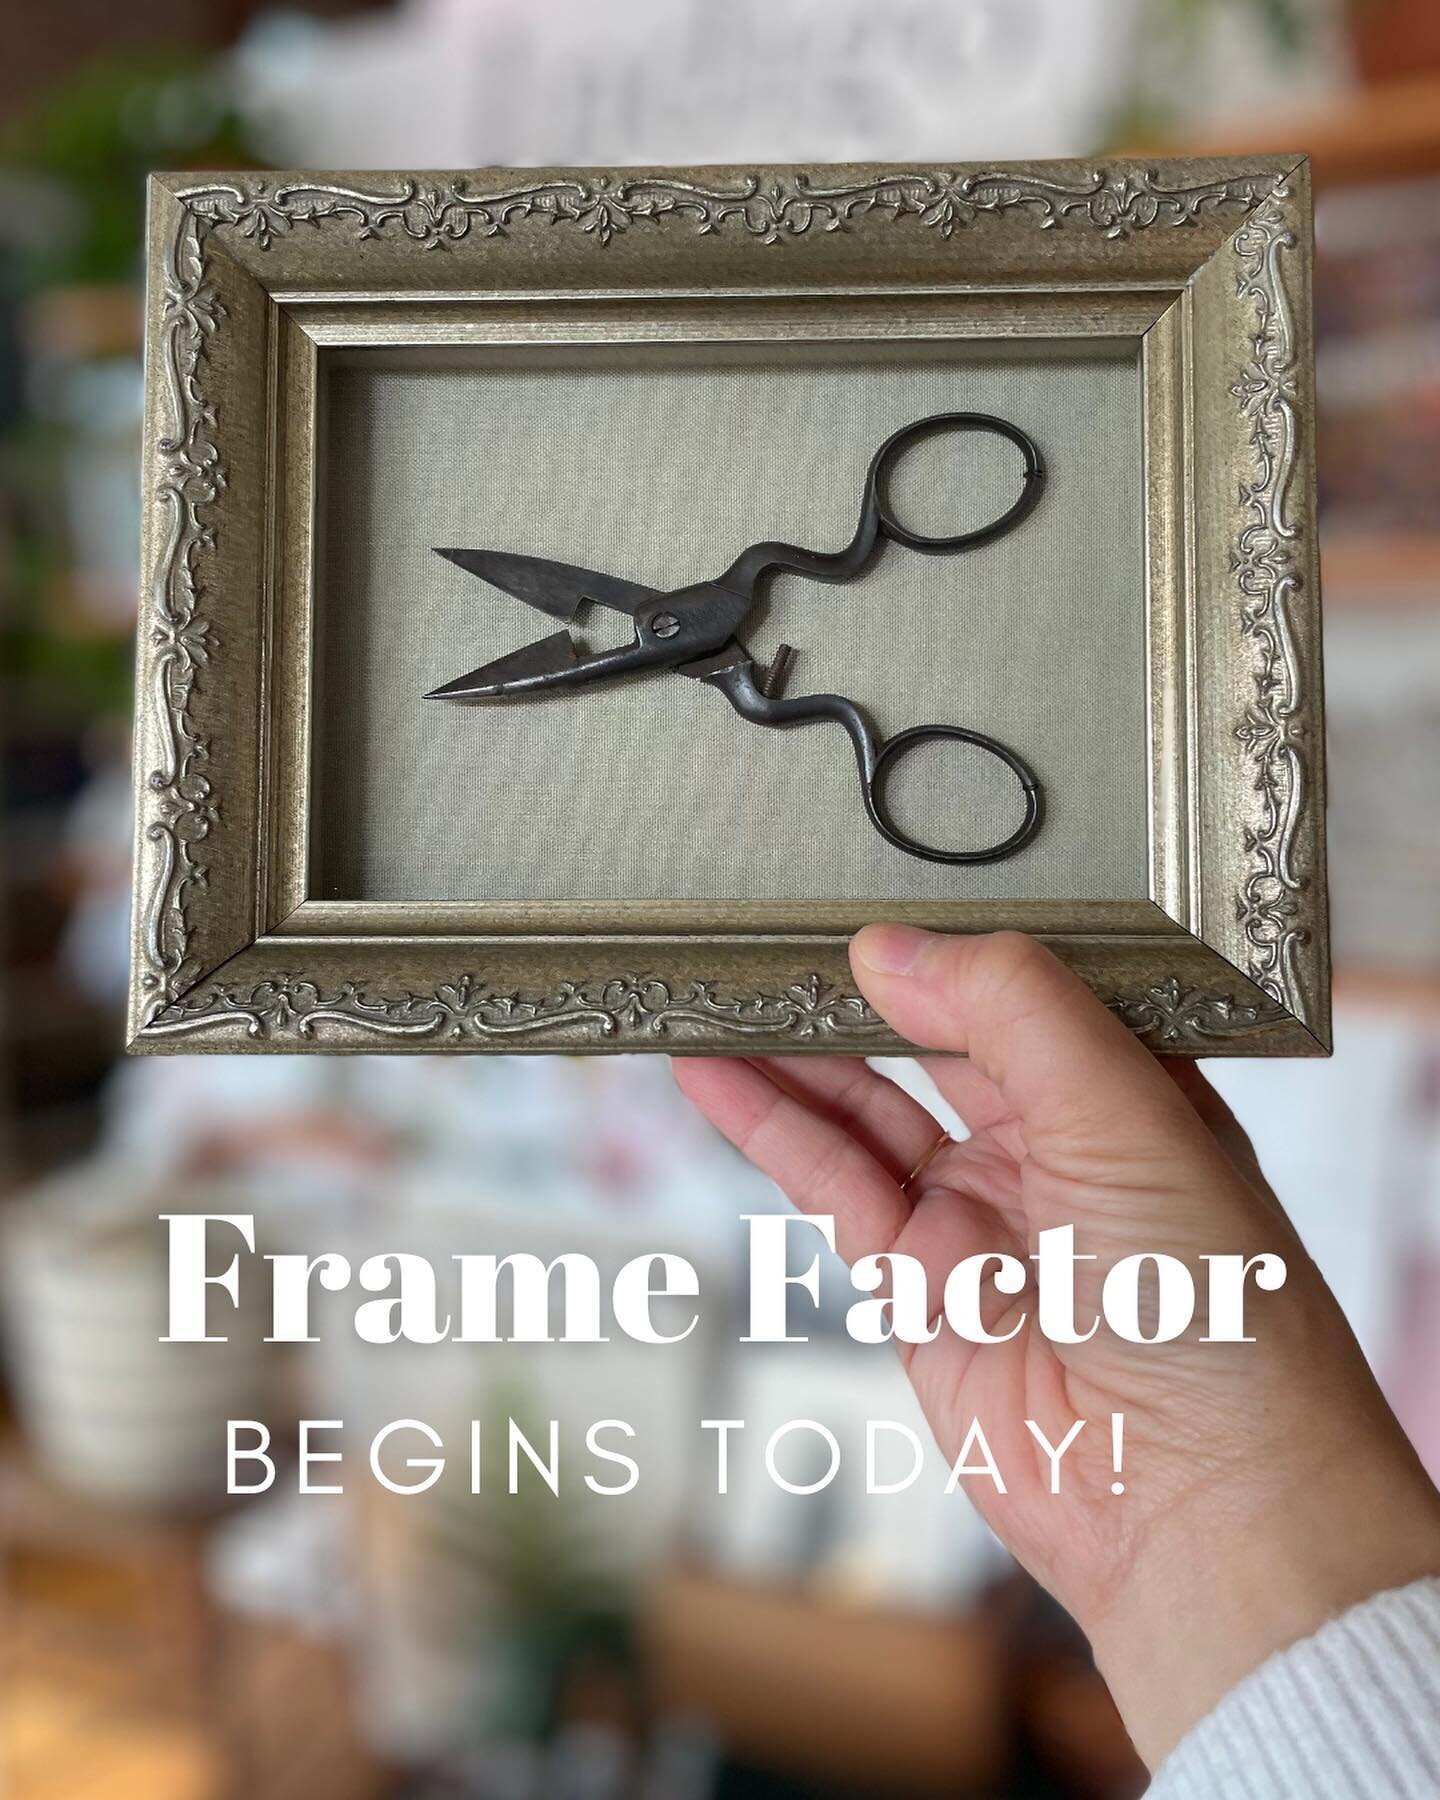 Today is the day! Bring in your Frame Factor pieces now until Saturday!

Frame Factor is where you can bring in items smaller and no thicker than your hand. You&rsquo;ll fill out a short form telling us about the piece and we will design a frame for 